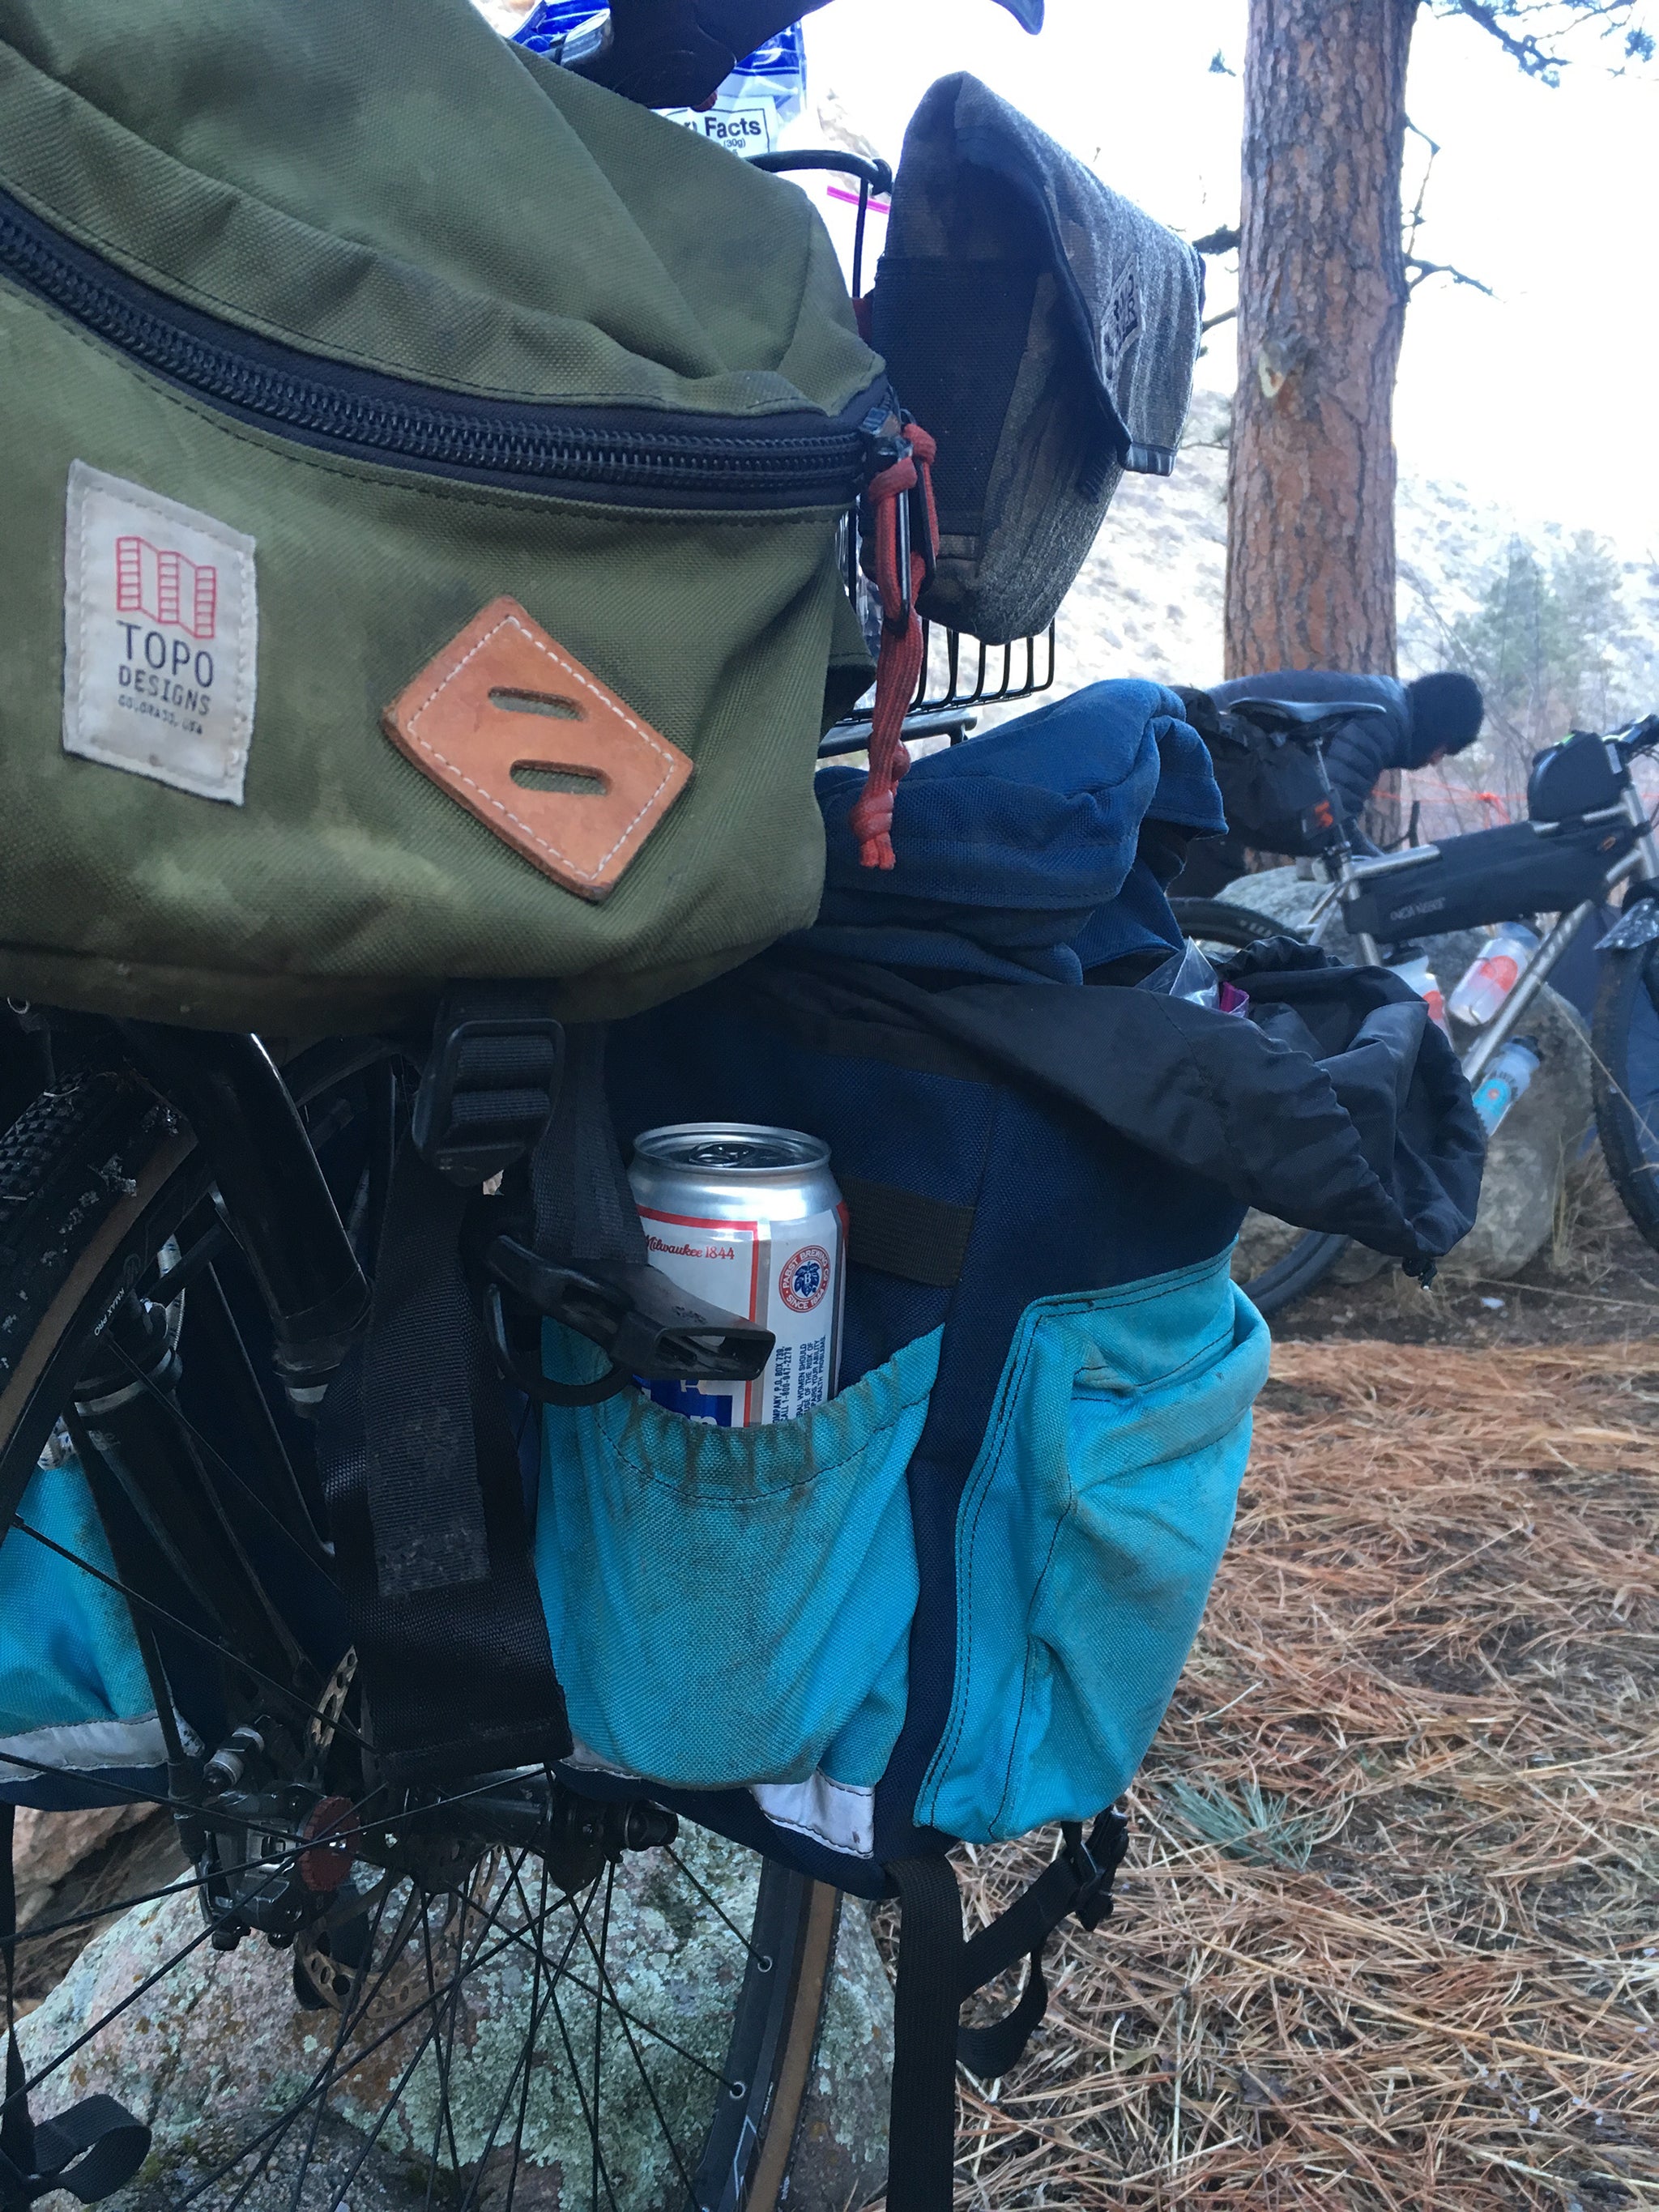 packed camping gear on bike